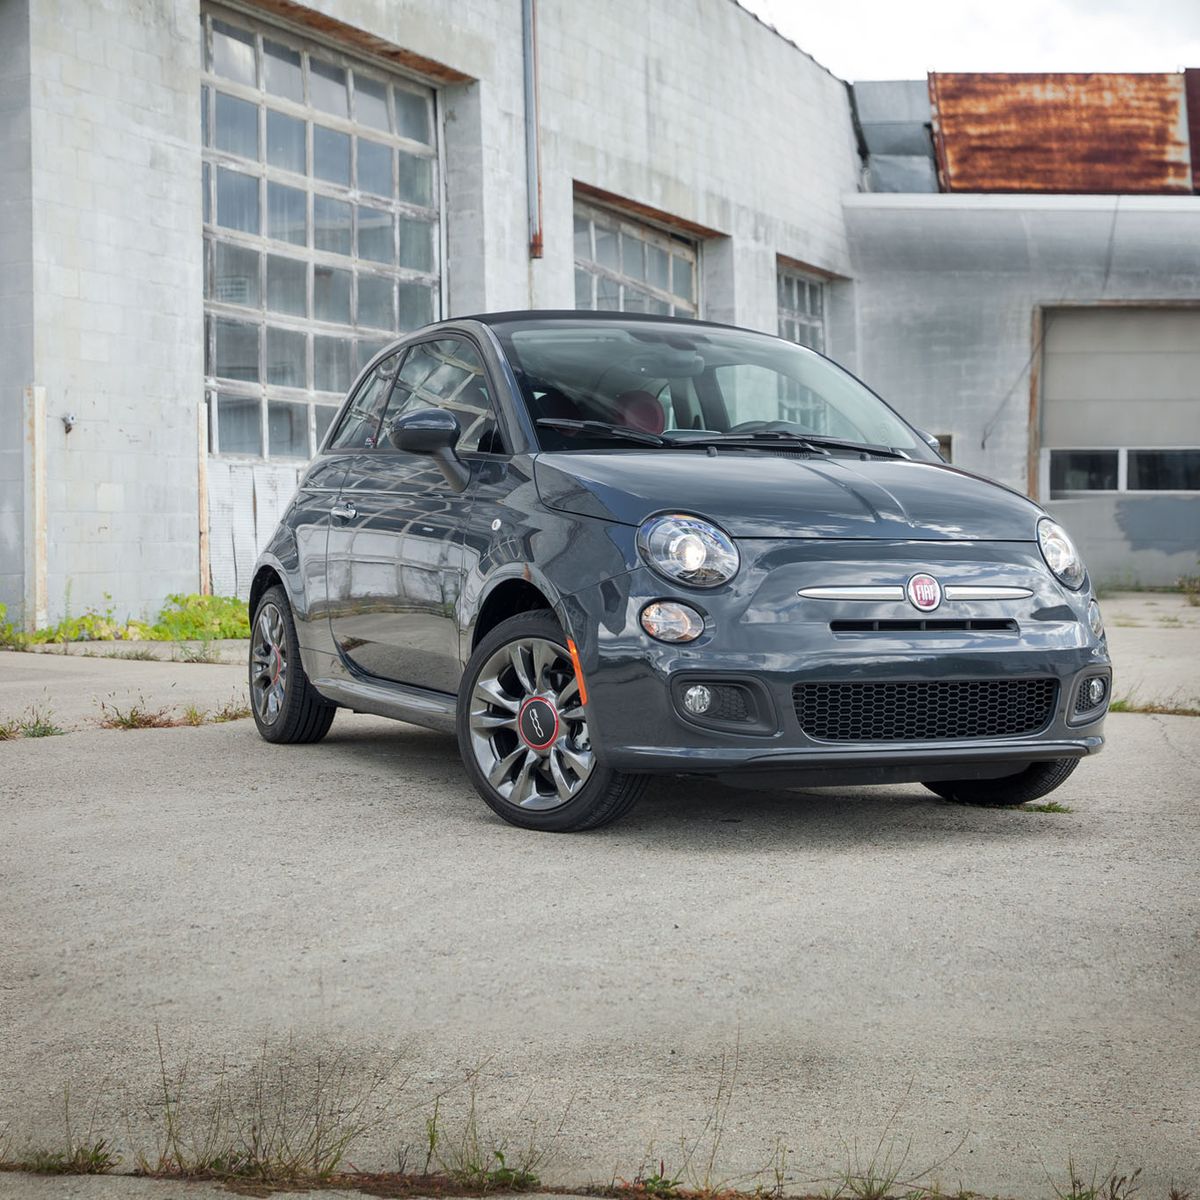 2017 Fiat 500C Manual Test | Review | Car and Driver